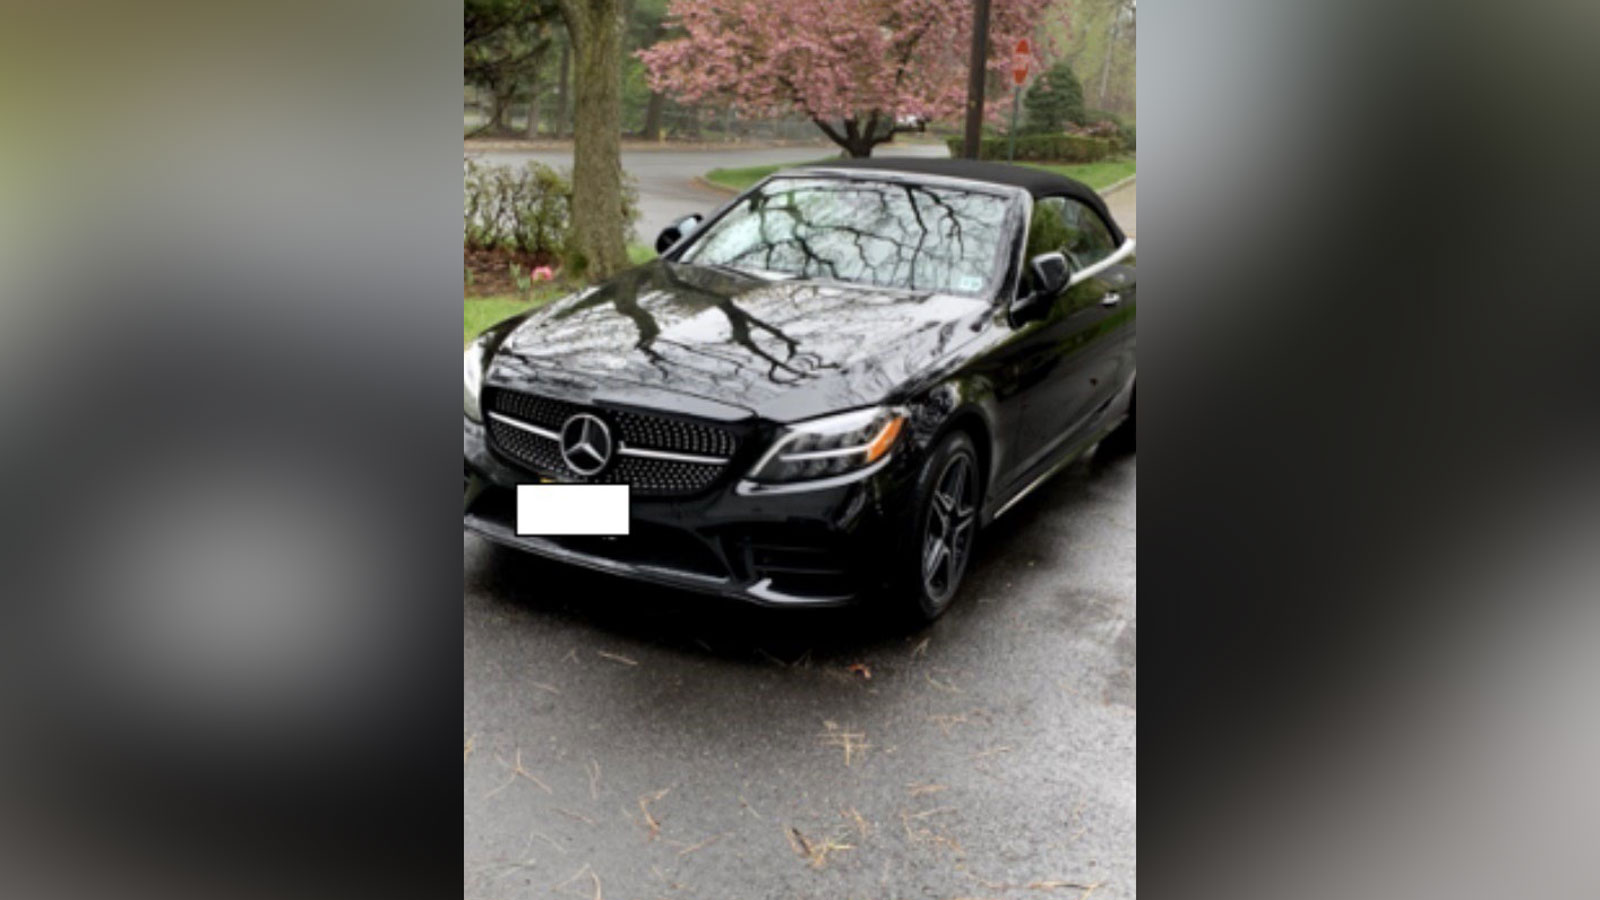 A Mercedes-Benz Convertible Nadine Menendez purchased using a $15,000 down payment with a combination of cash, a credit card, and several checks, and taking out an automotive loan.